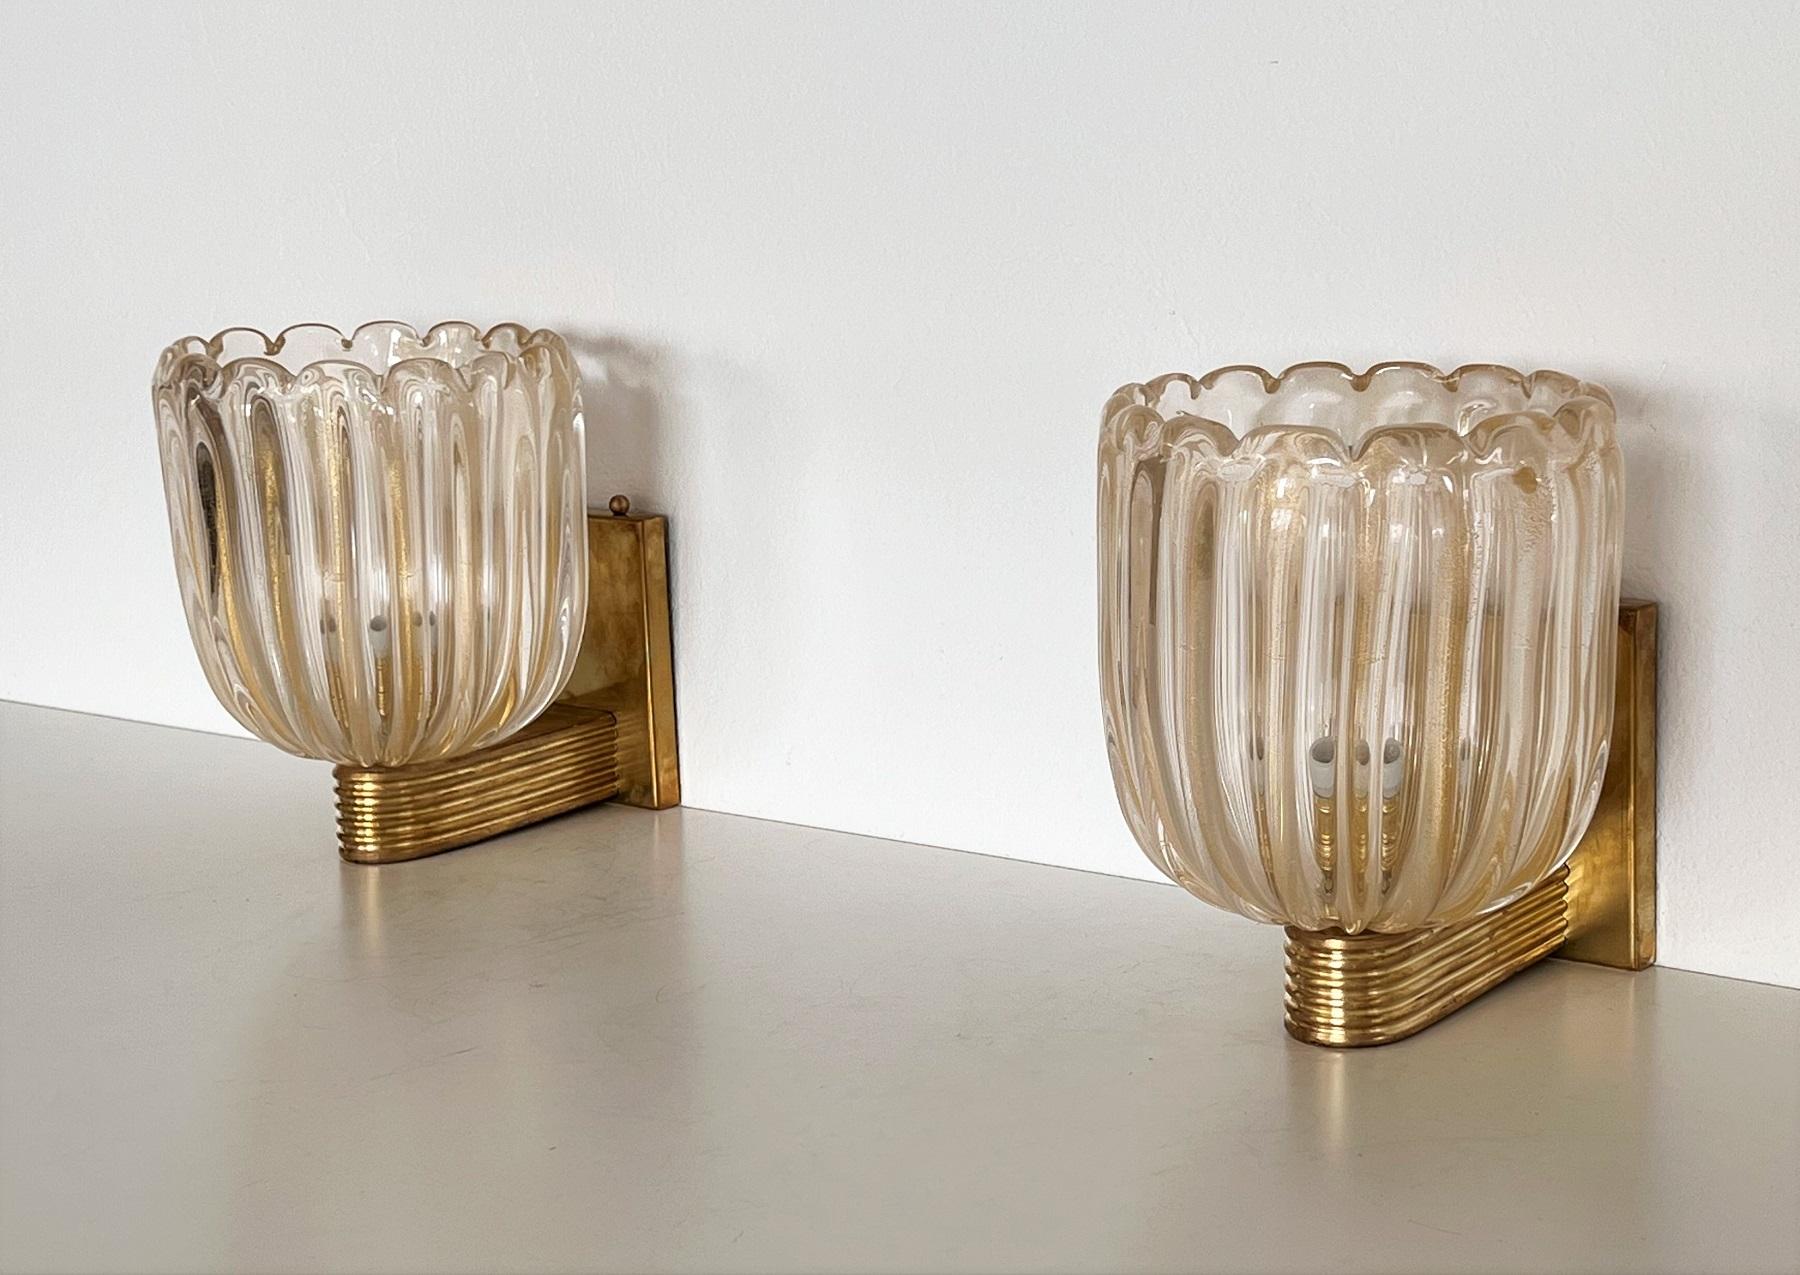 Hand-Crafted Italian Brass and Murano Glass Wall Lights or Sconces in Art Deco Style, 1990s